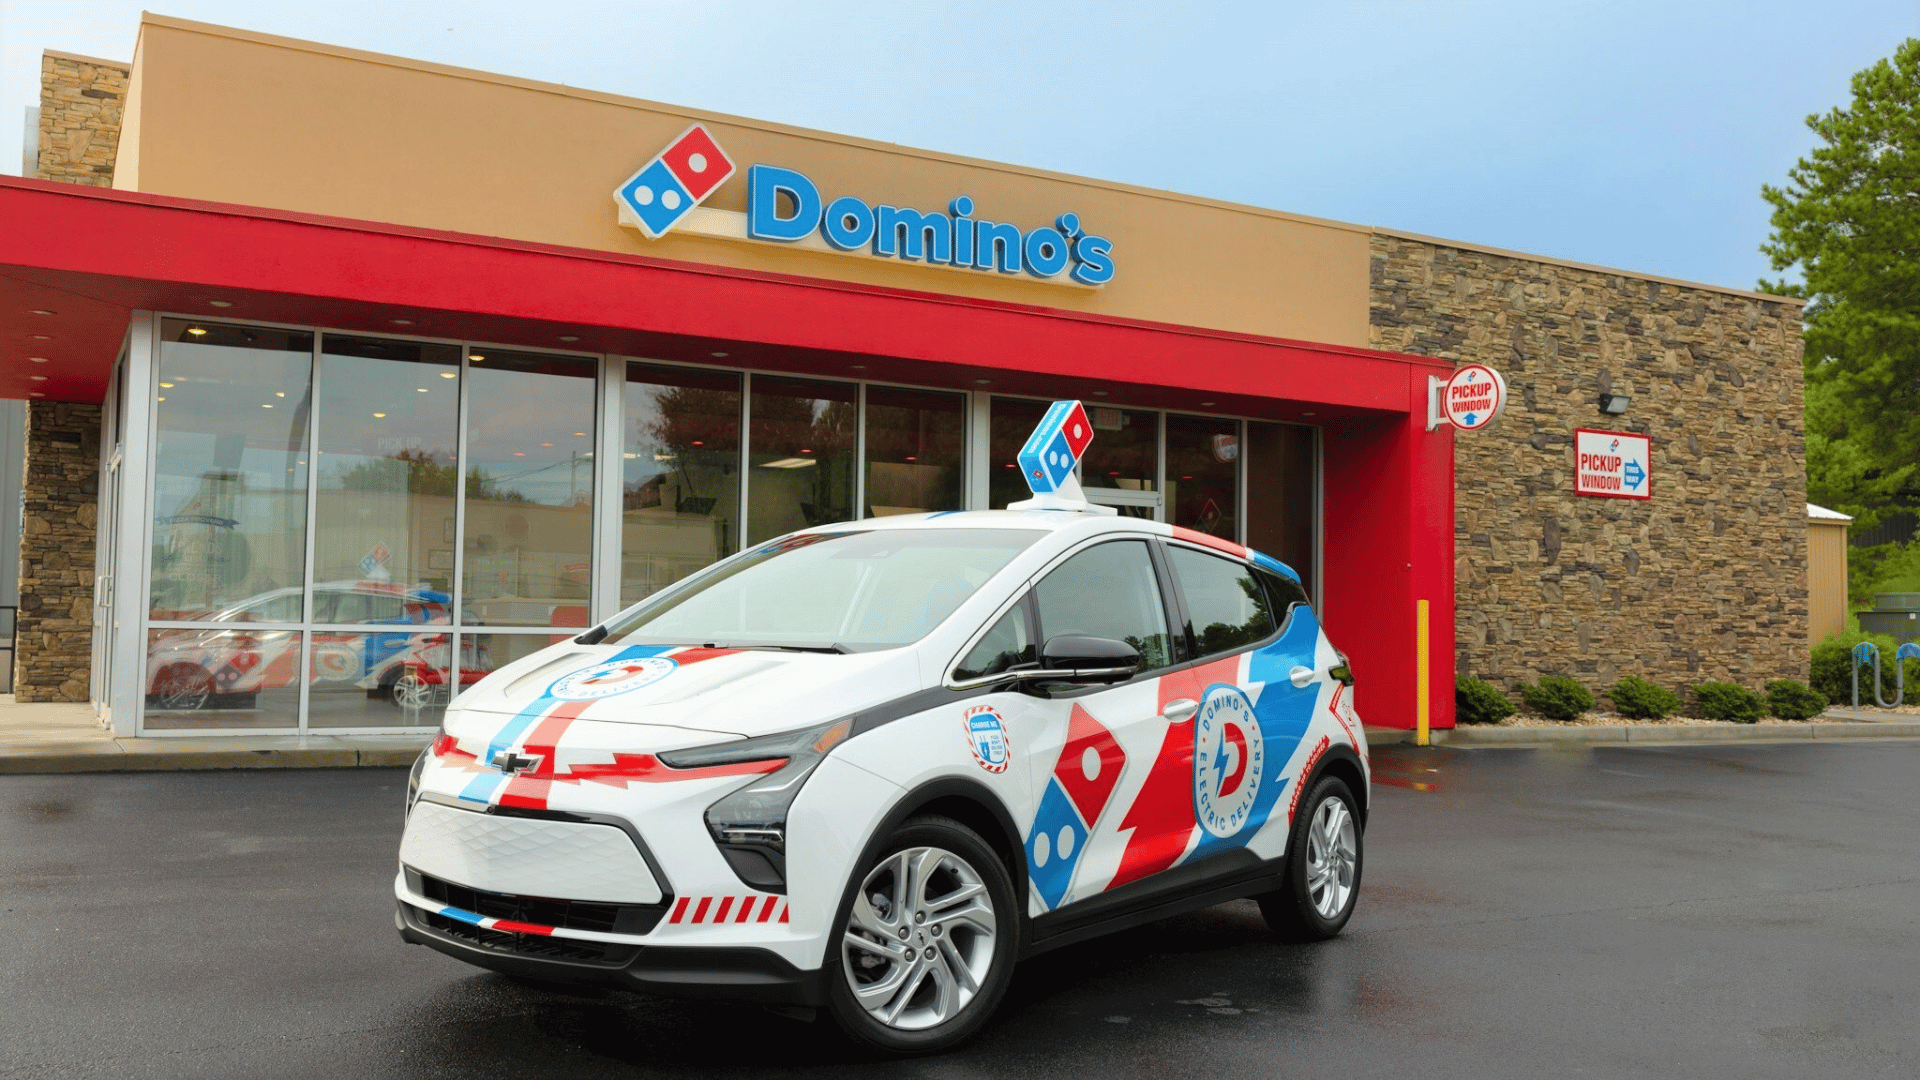 Domino's electric vehicle outside a domino's restaurant